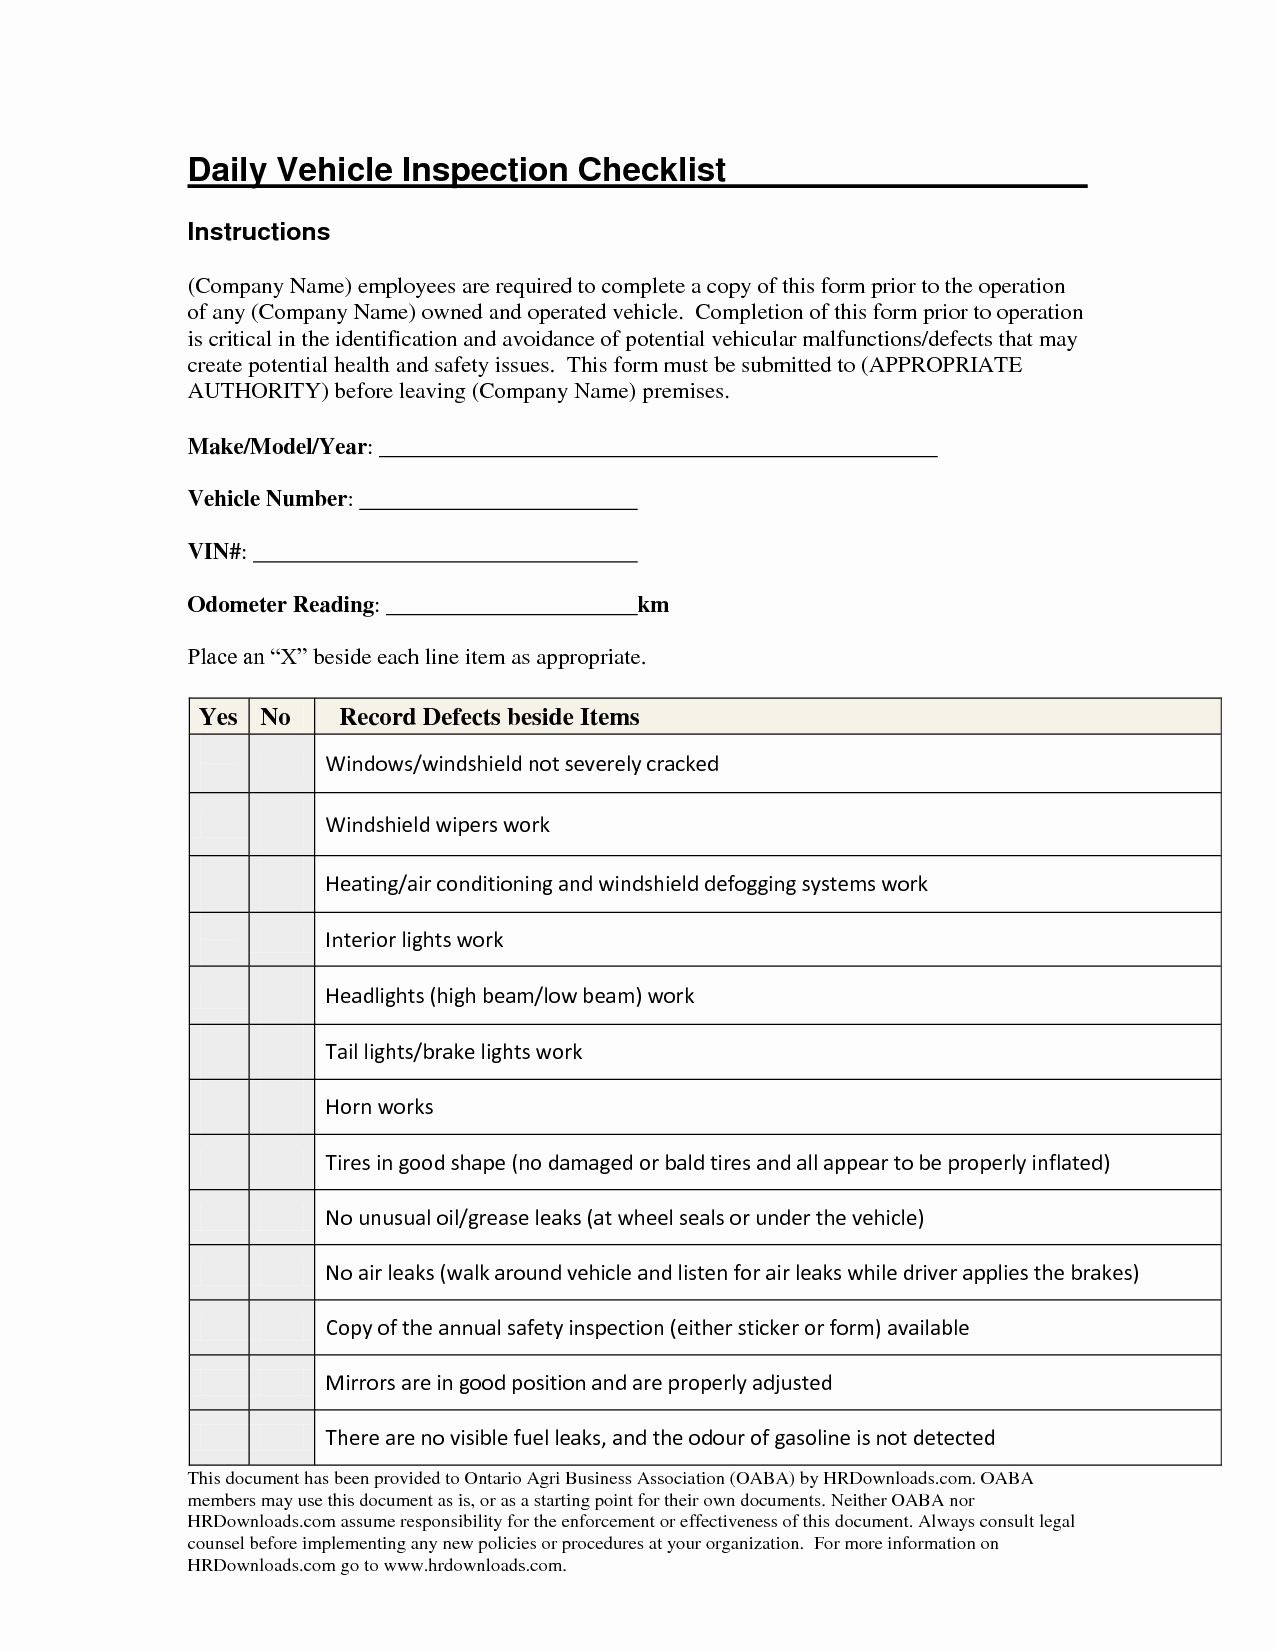 Vehicle Inspection Sheet Template Lovely Daily Vehicle Inspection Checklist form Image Gallery